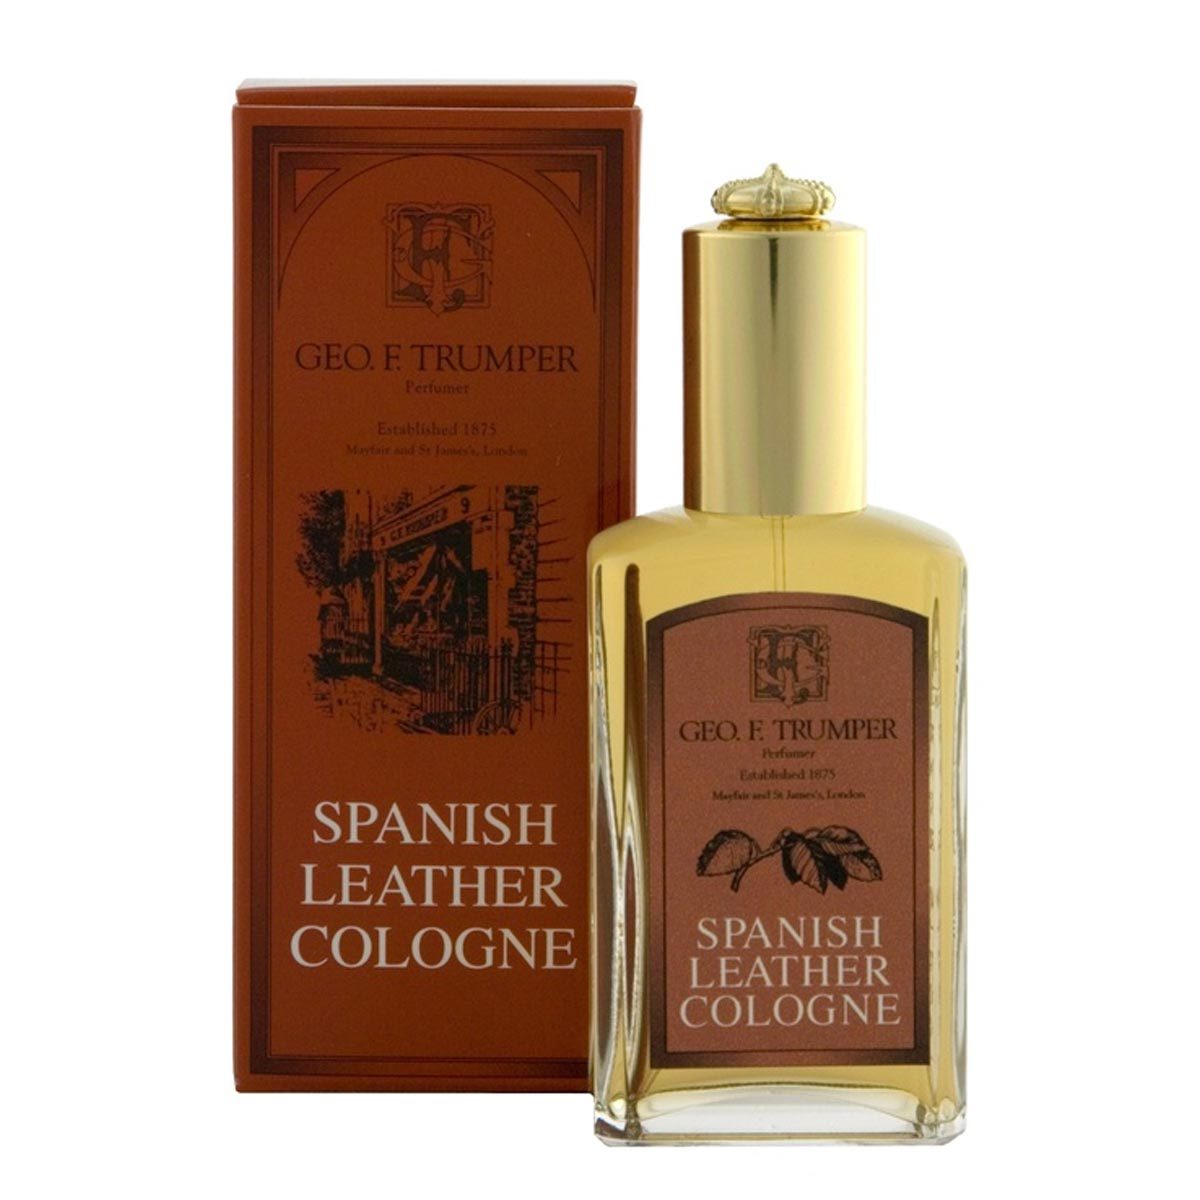 Primary image of Spanish Leather Cologne Spray